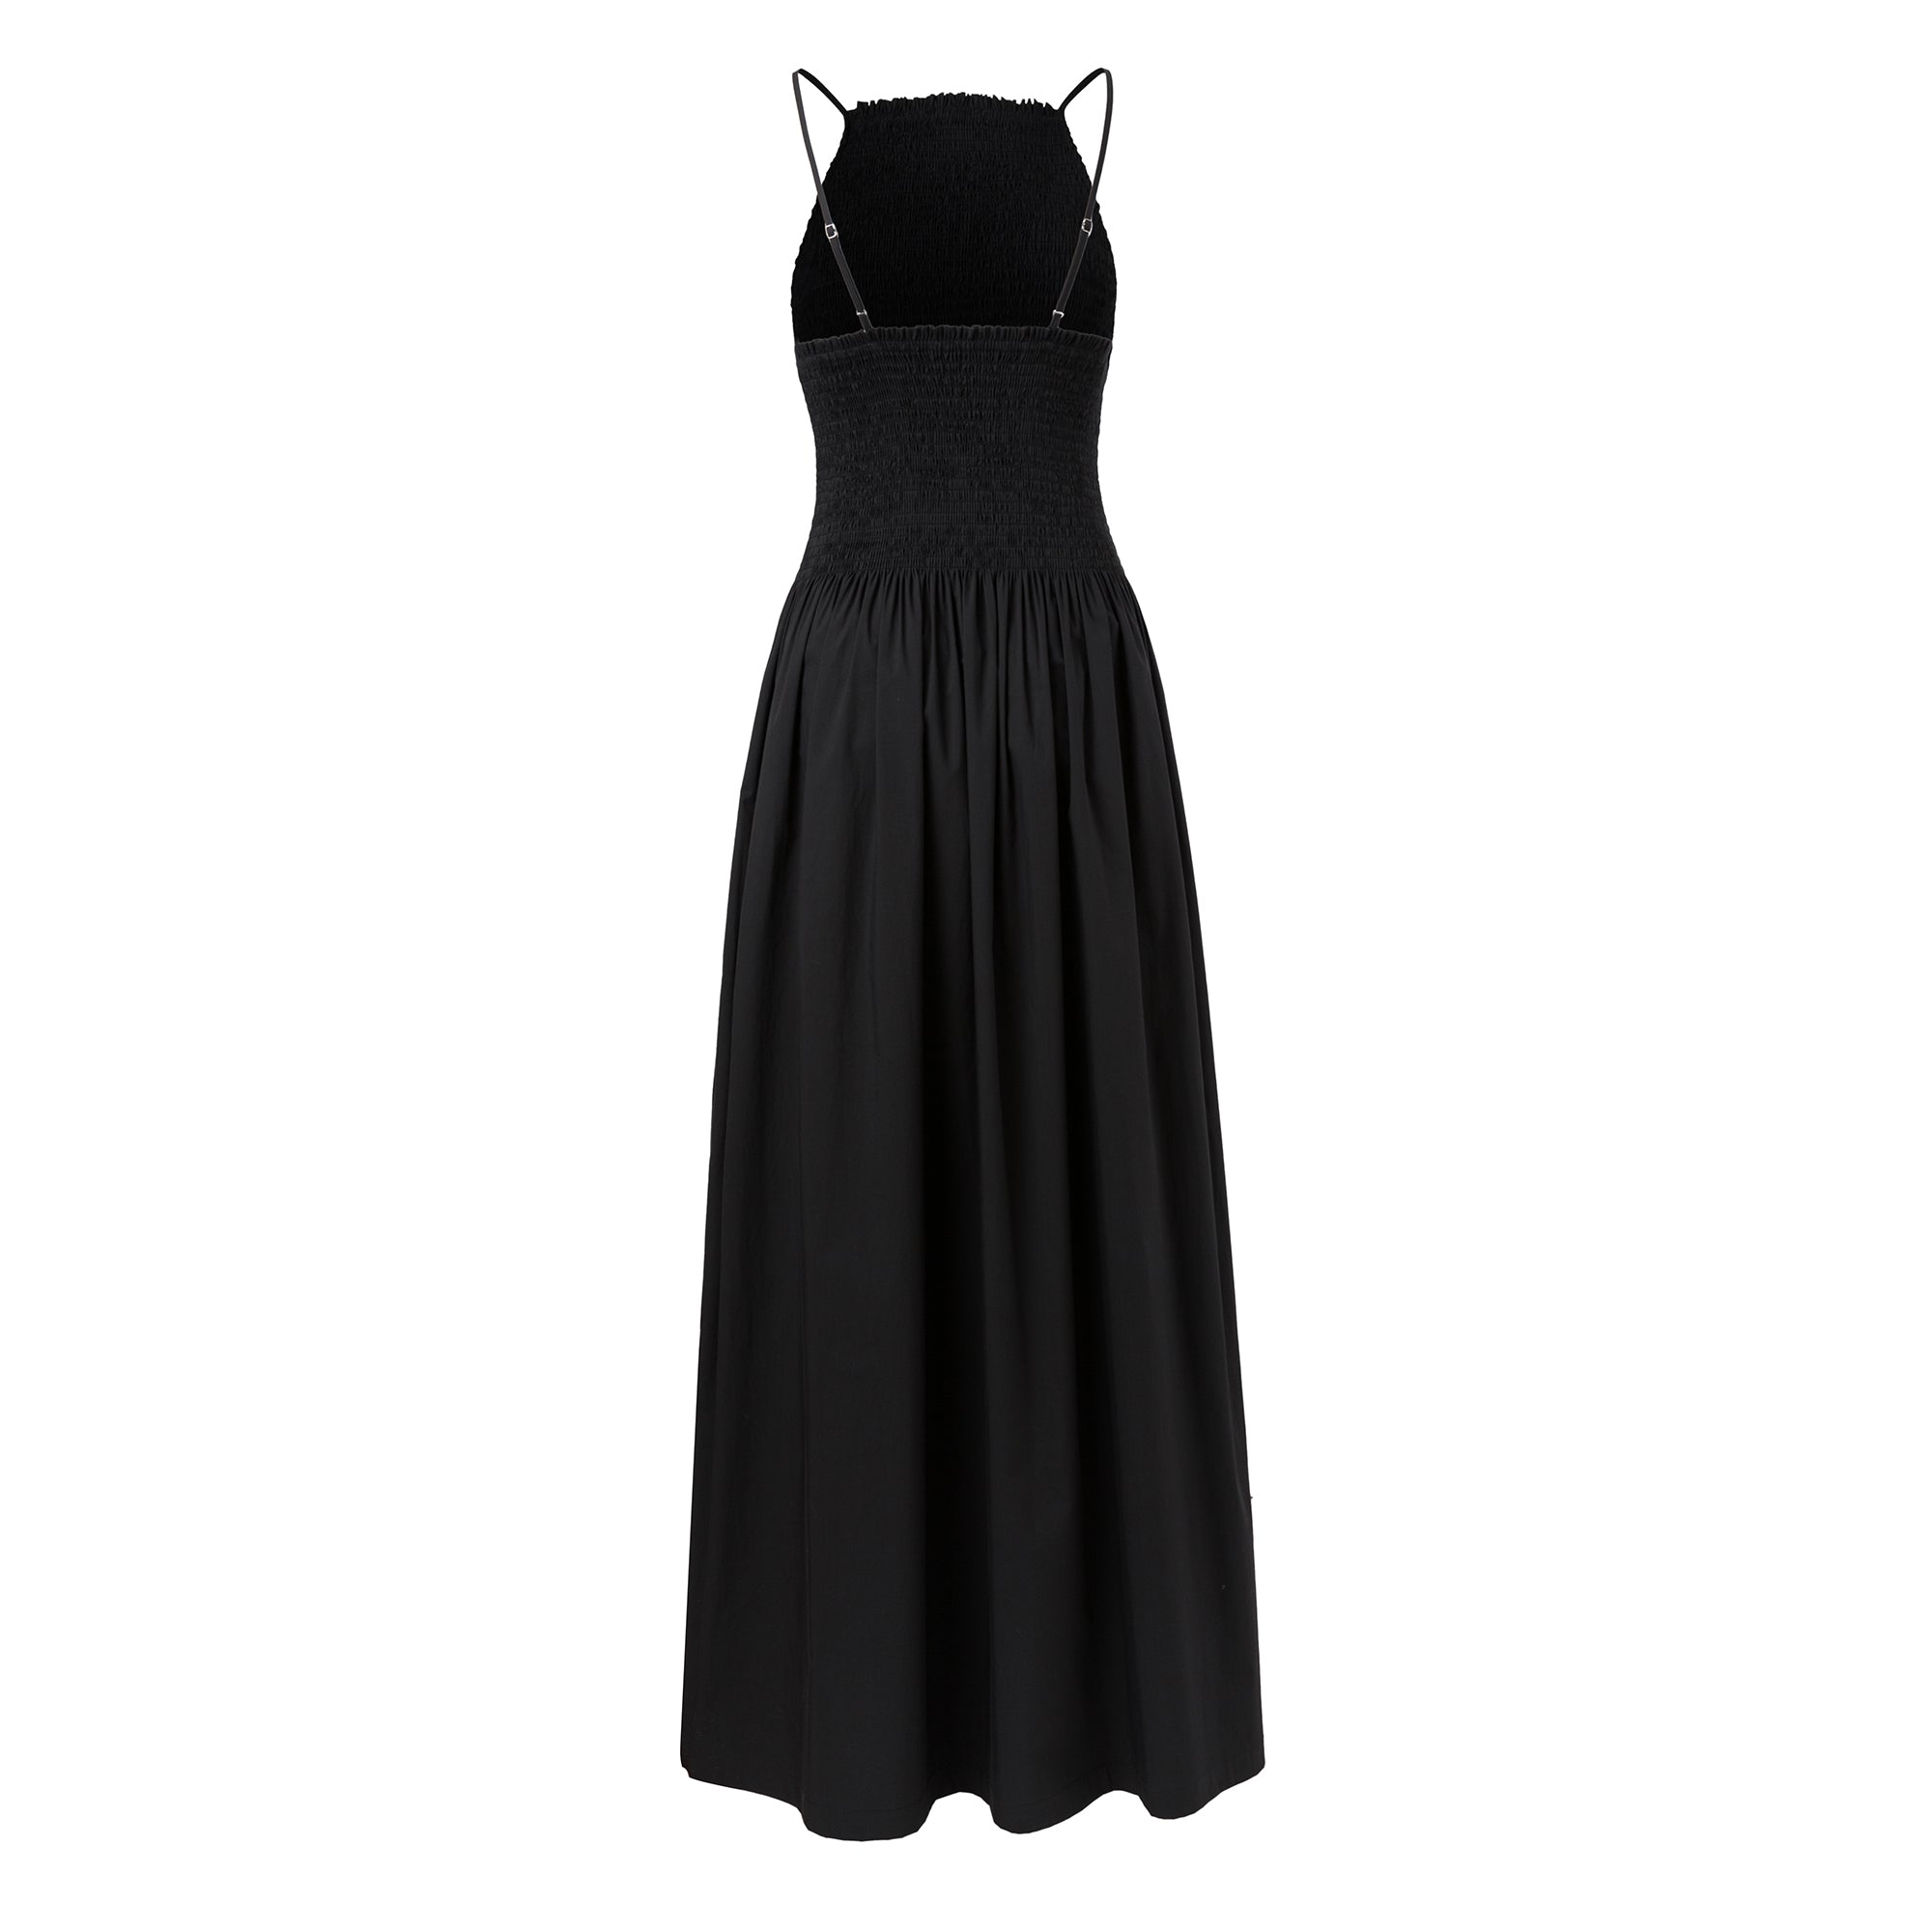 Ther. Black Smocked Trim Dress | MADA IN CHINA